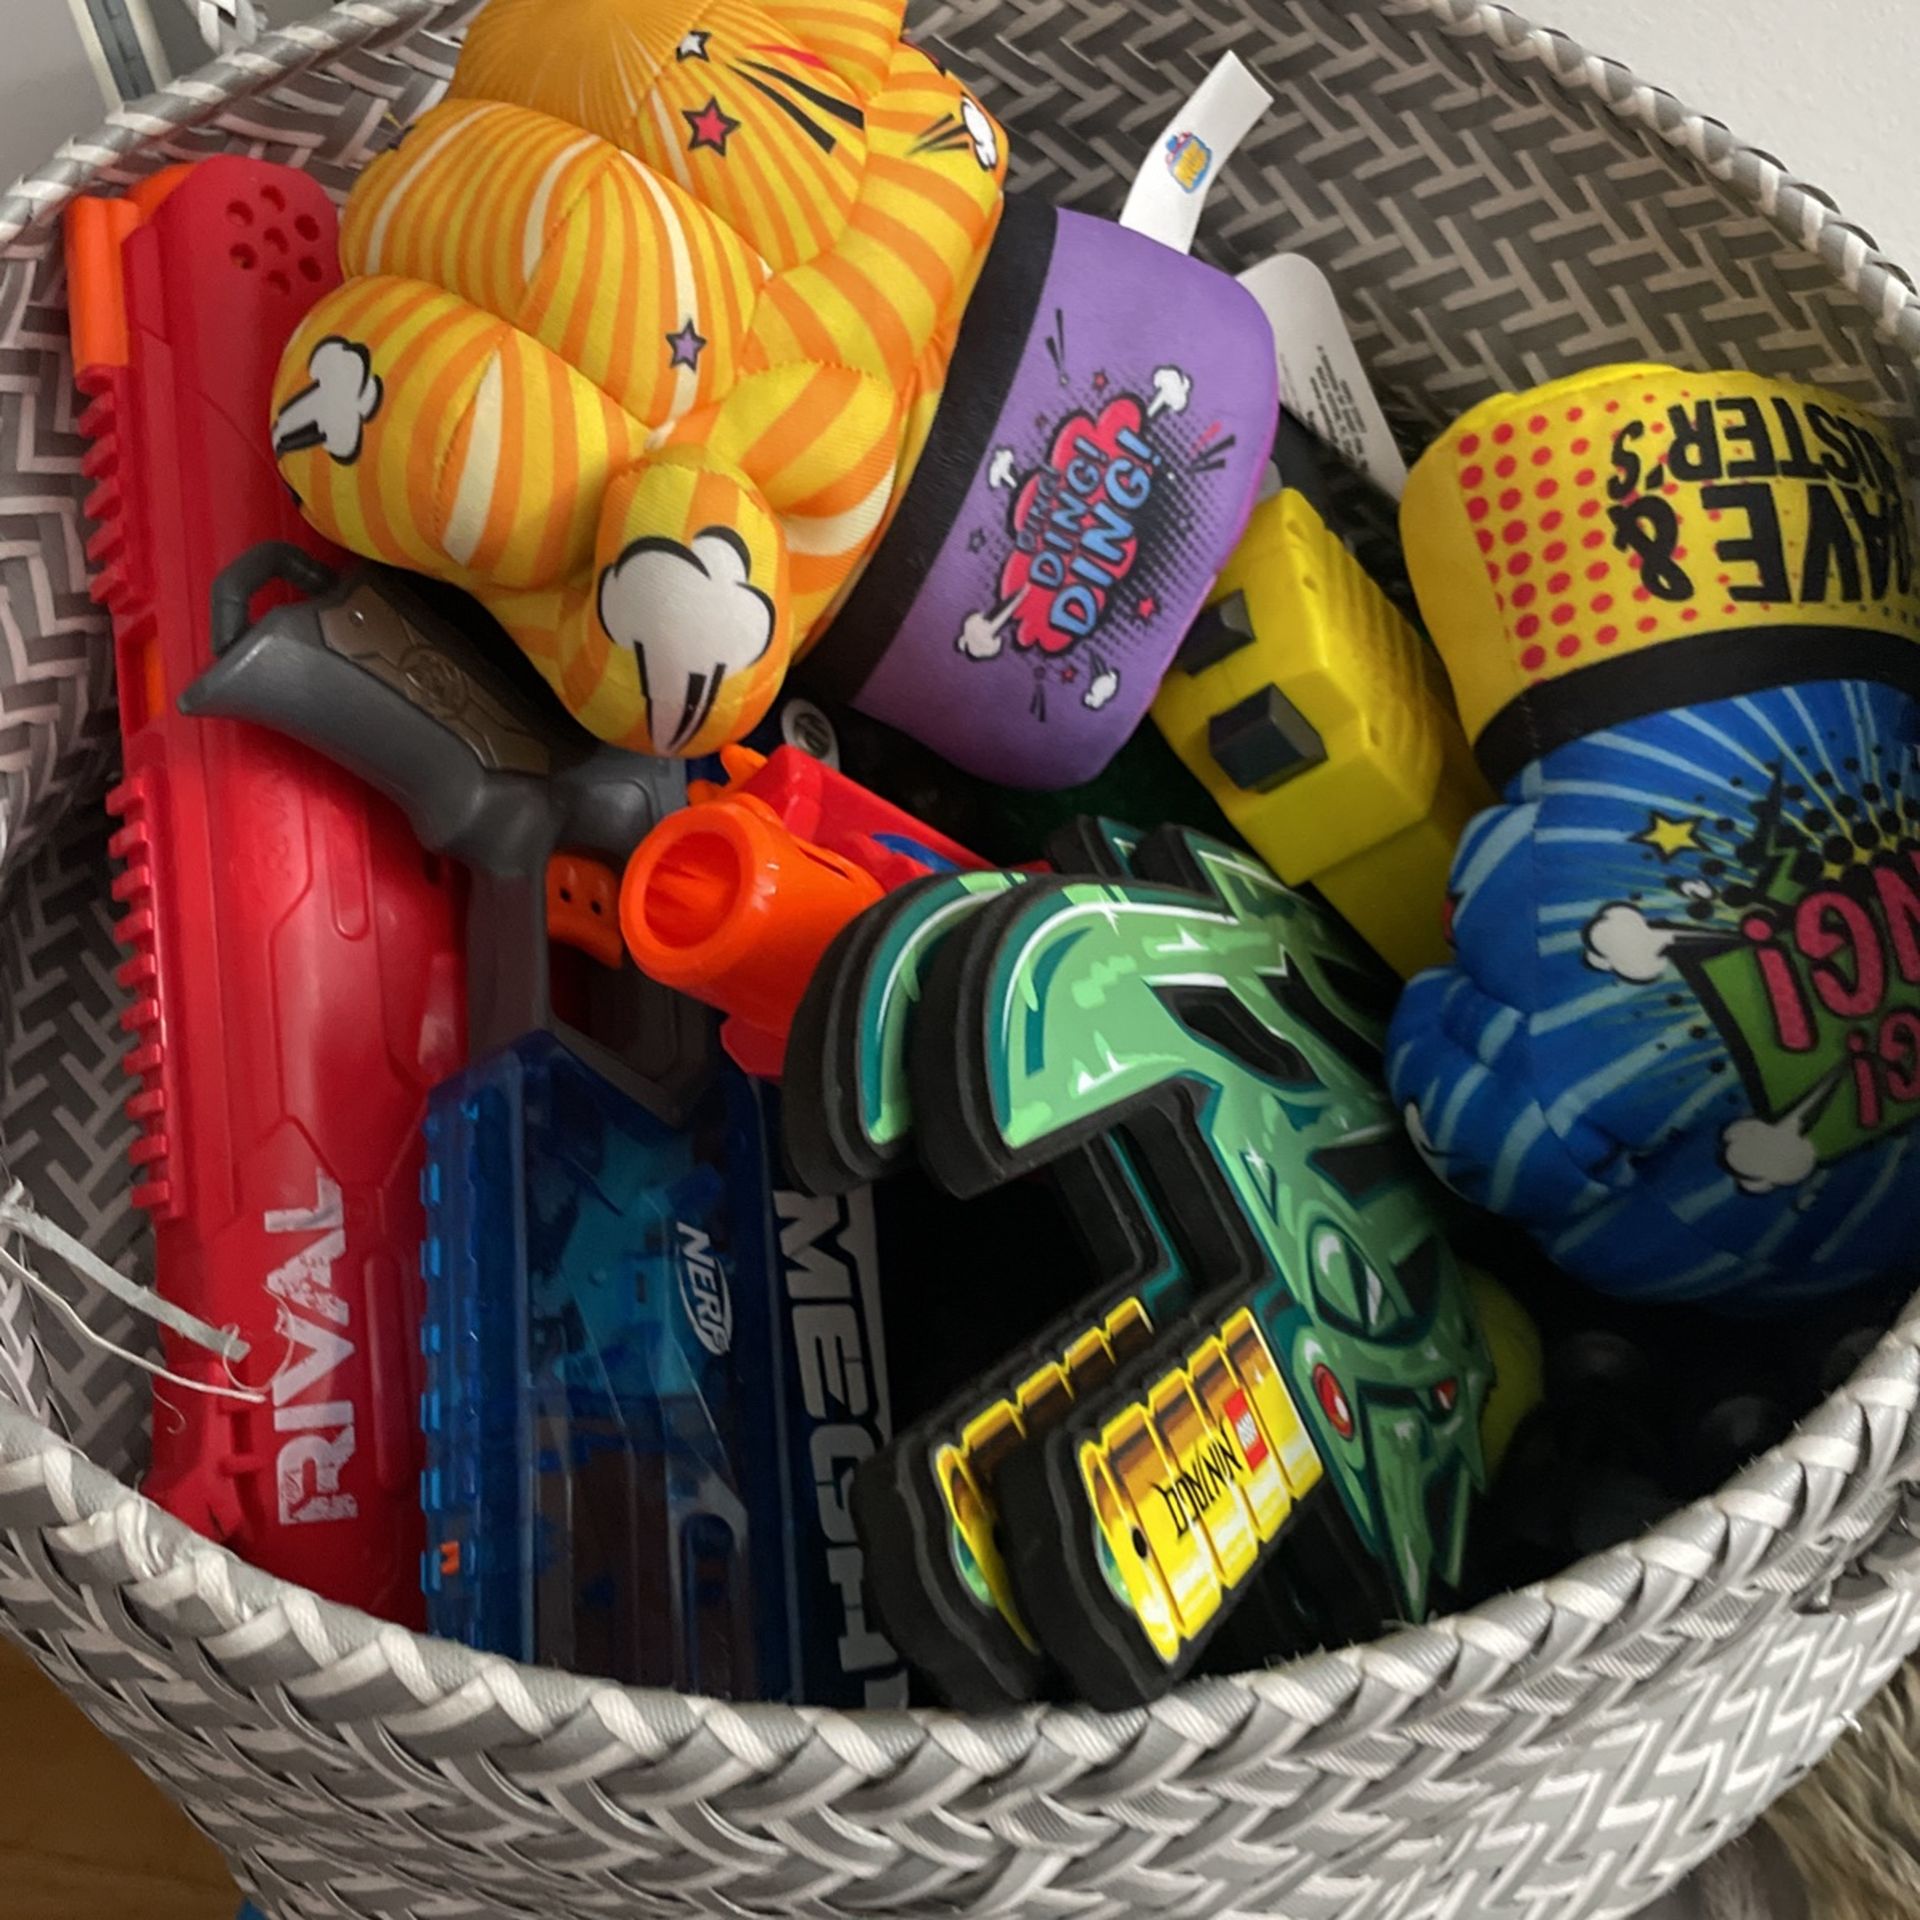 Basket With Nerf Guns And Toys For Children 